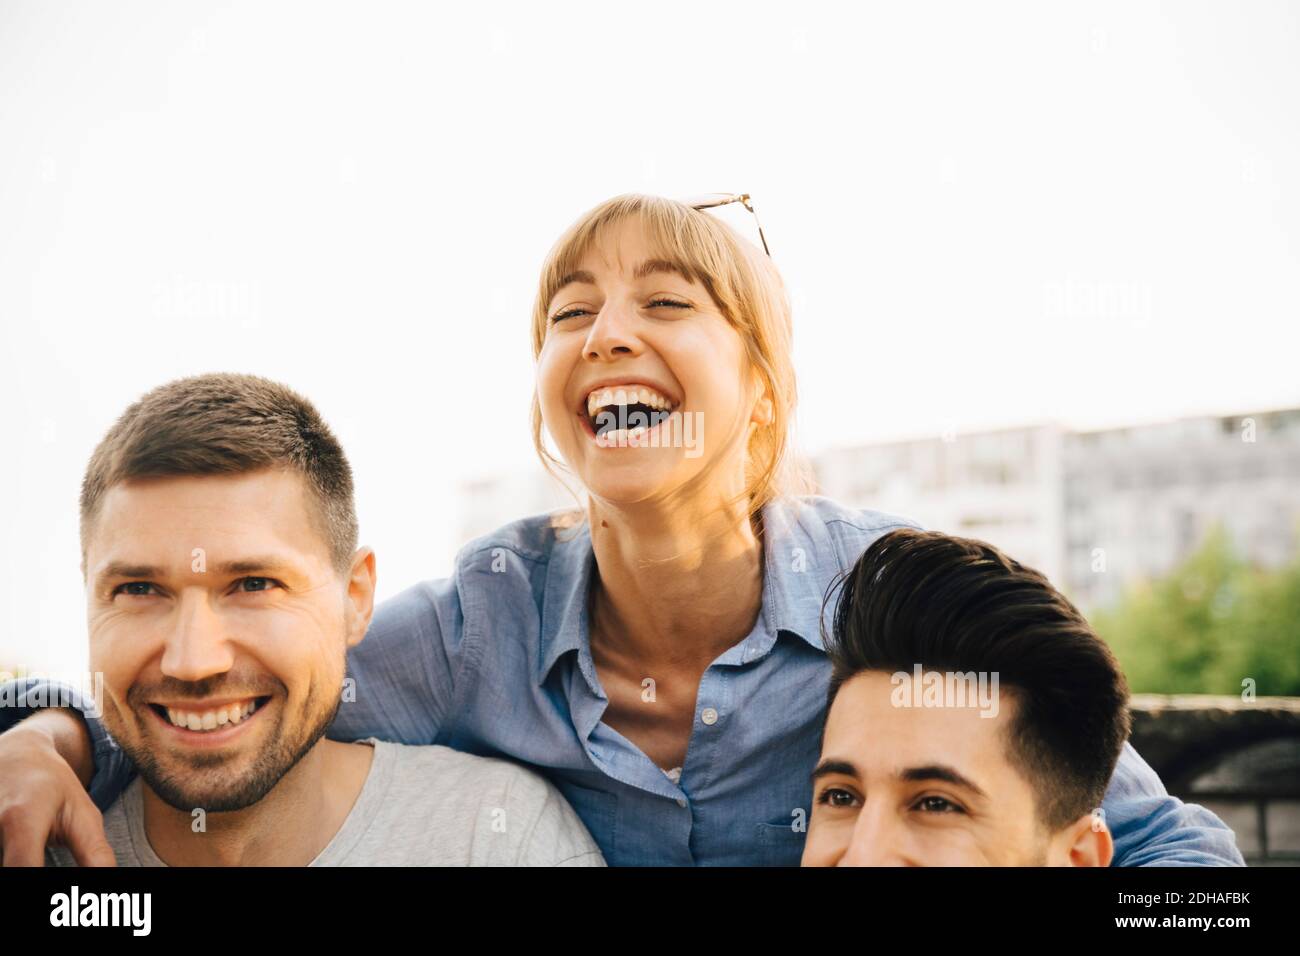 Mid adult woman laughing while standing by male friends at social gathering Stock Photo